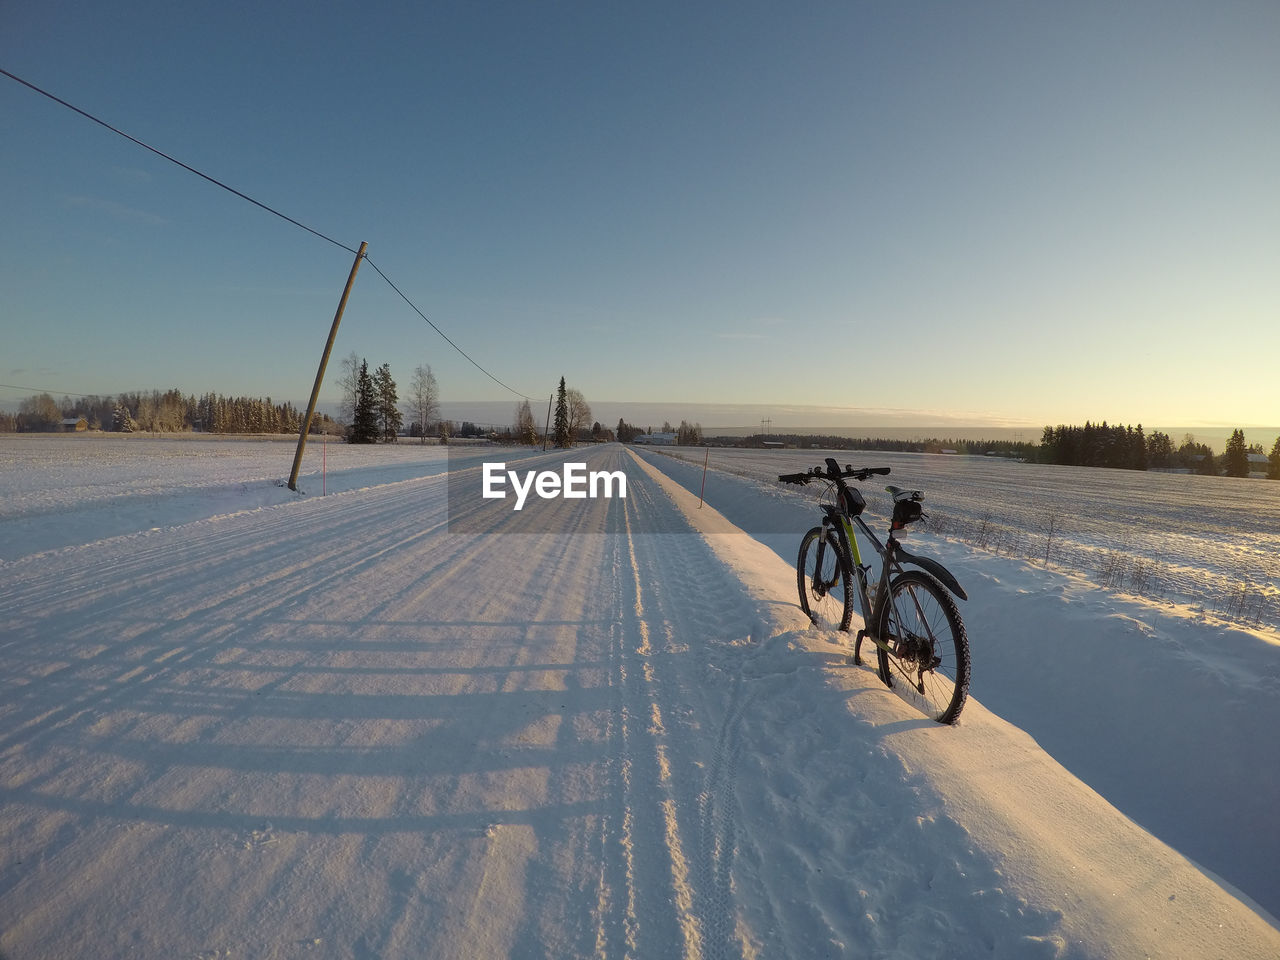 BICYCLE ON SNOW COVERED ROAD AGAINST SKY